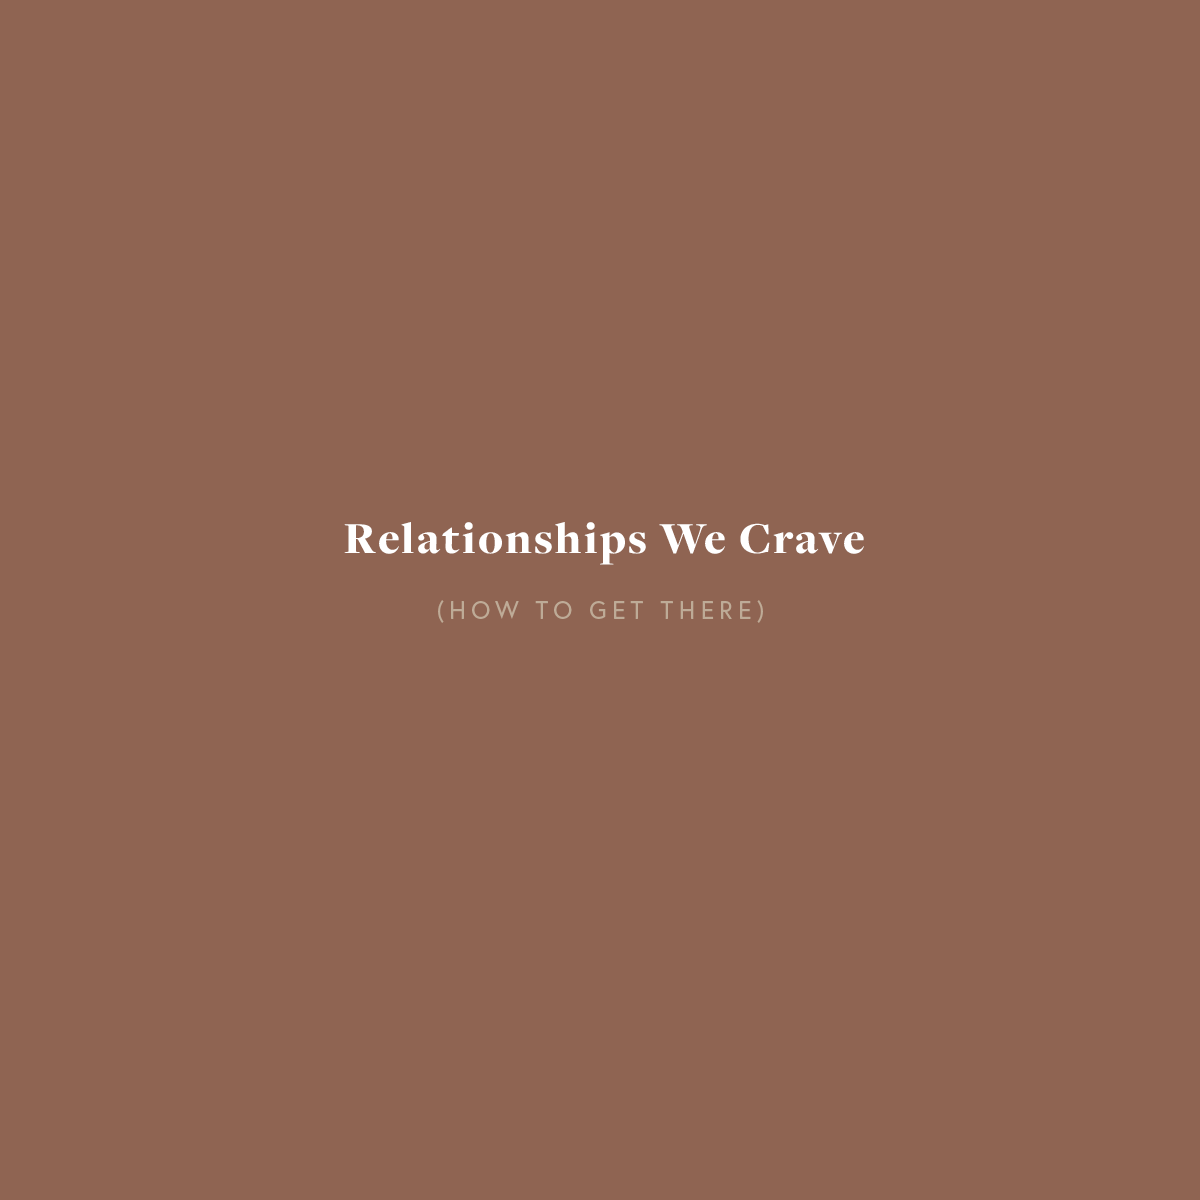 Relationships We Crave (How to Get There)